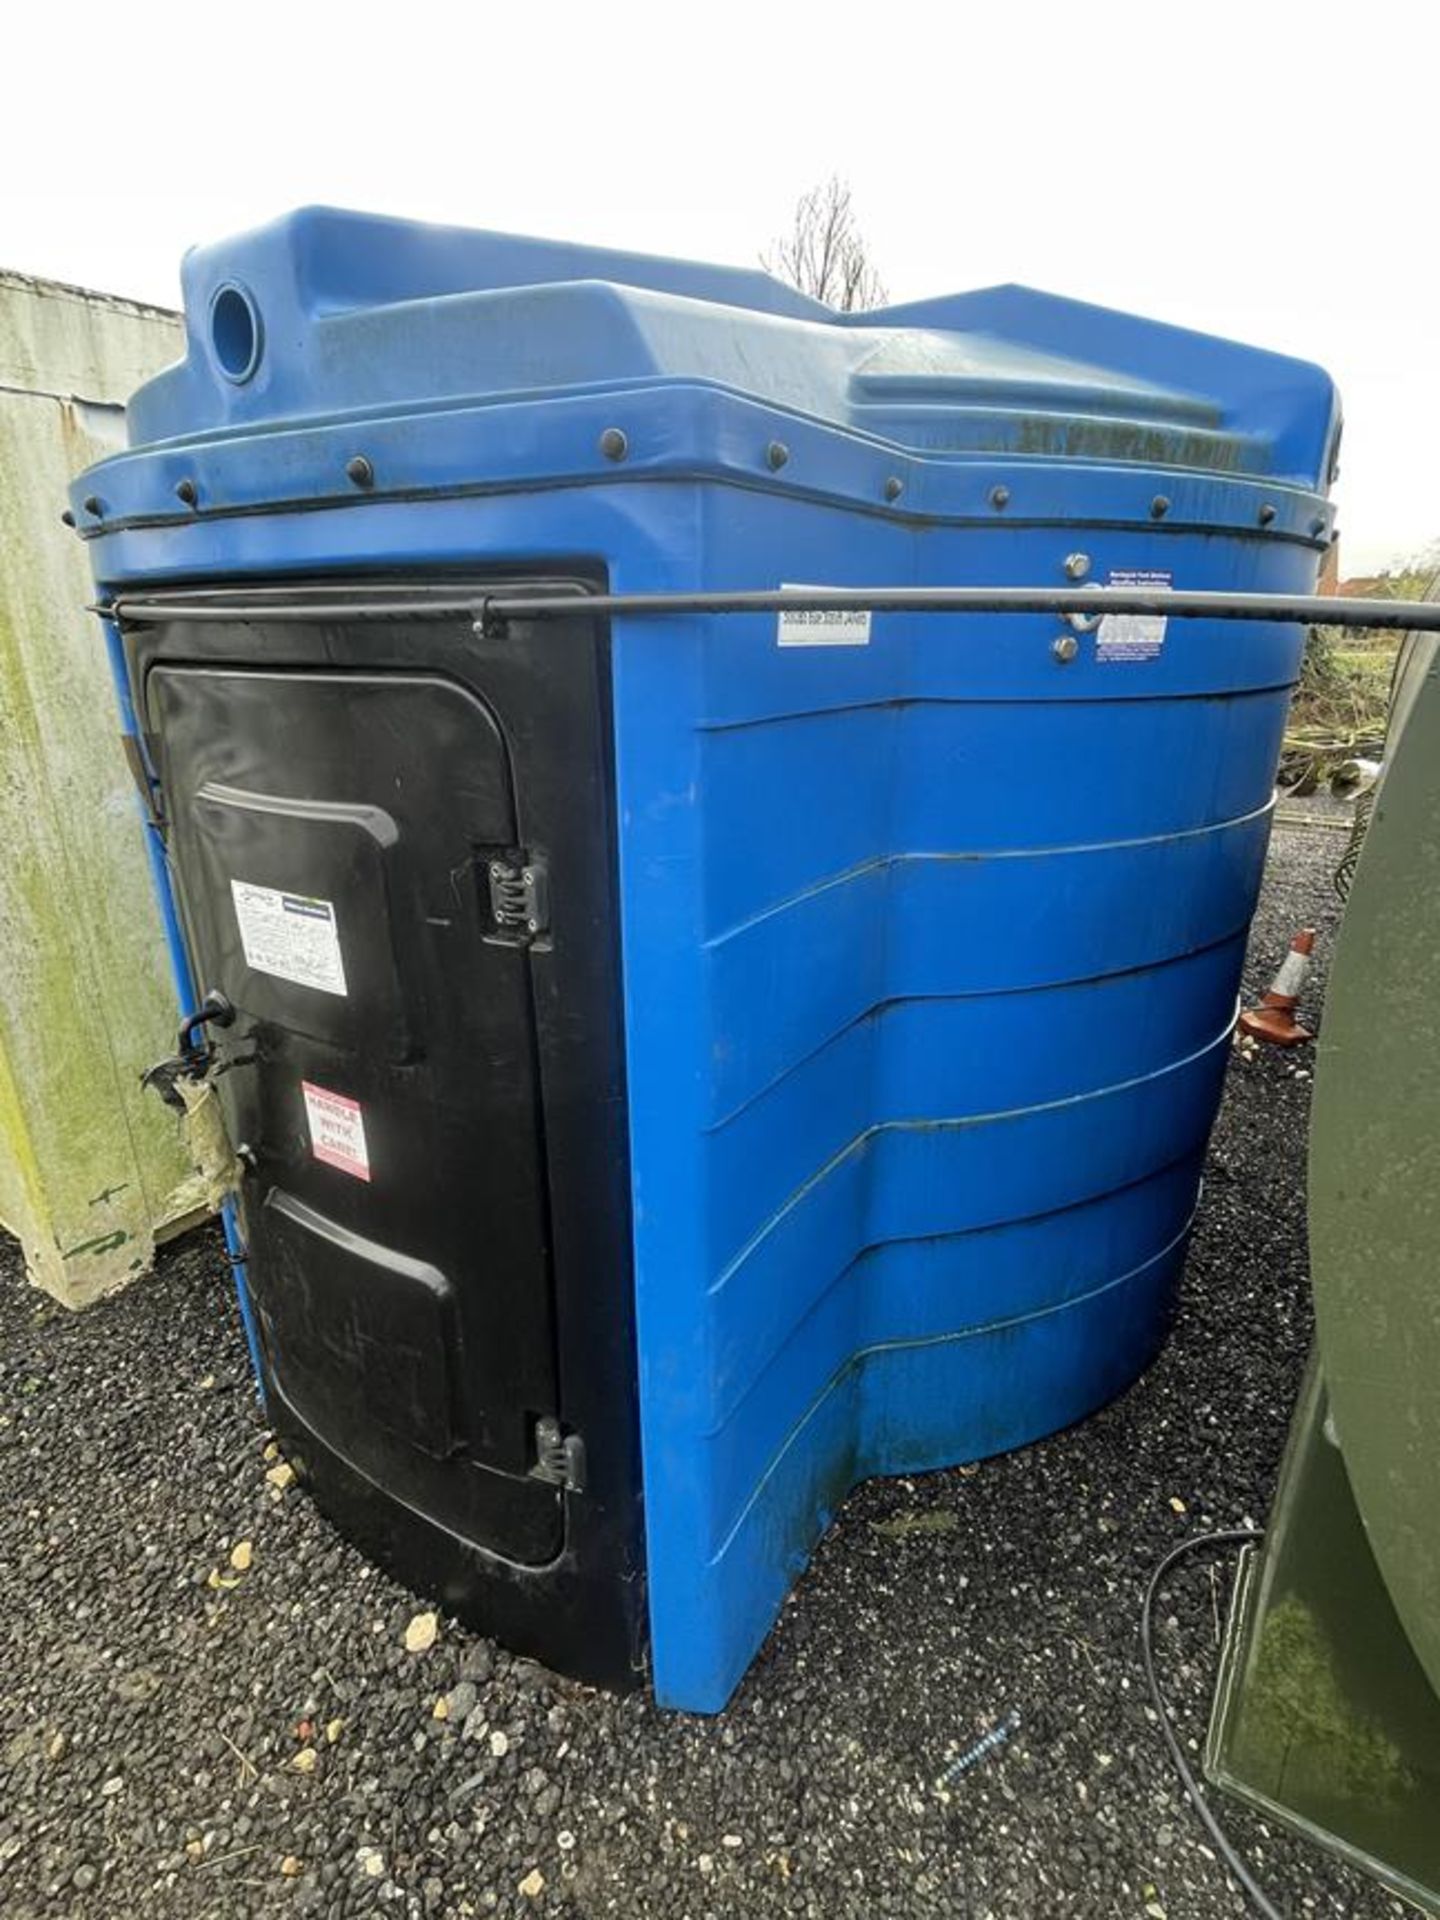 2013 Harlequin BlueStation 5,000 Litre Bunded AdBlue Tank S/No. 5234 Fitted with Piusi F0020305A - Image 2 of 5